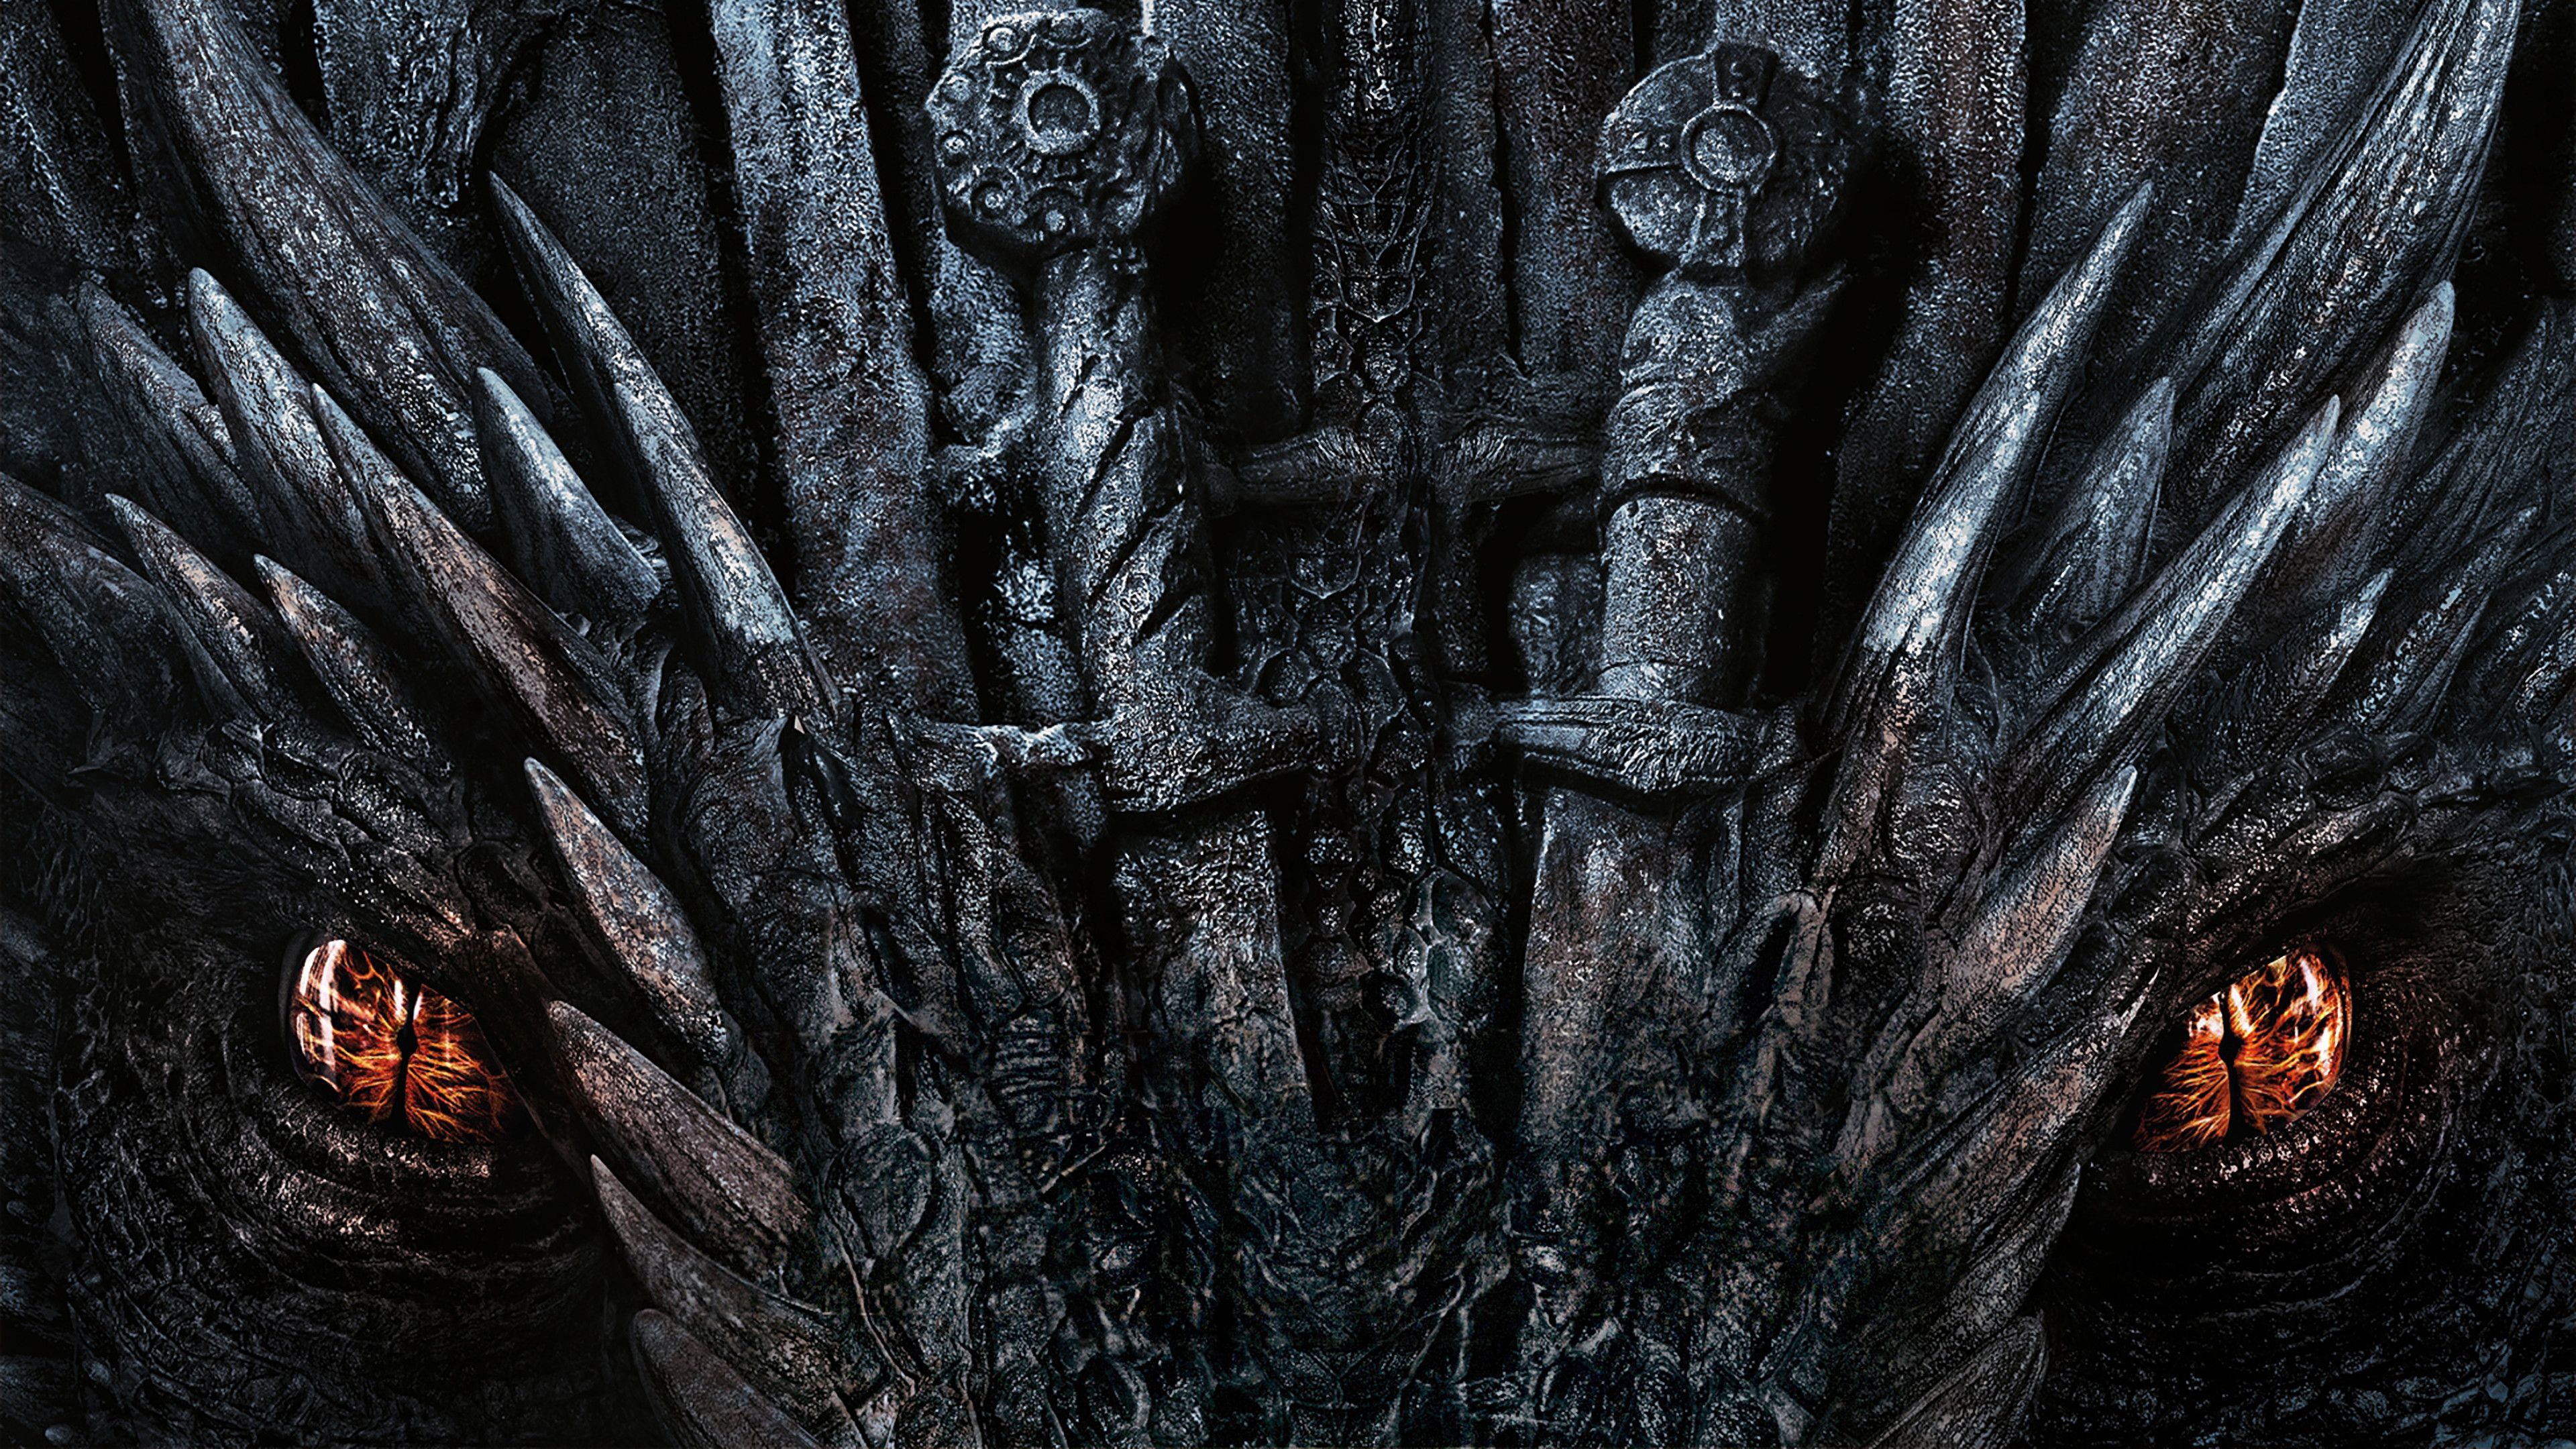 4K Game of Thrones Wallpaper Free 4K Game of Thrones Background